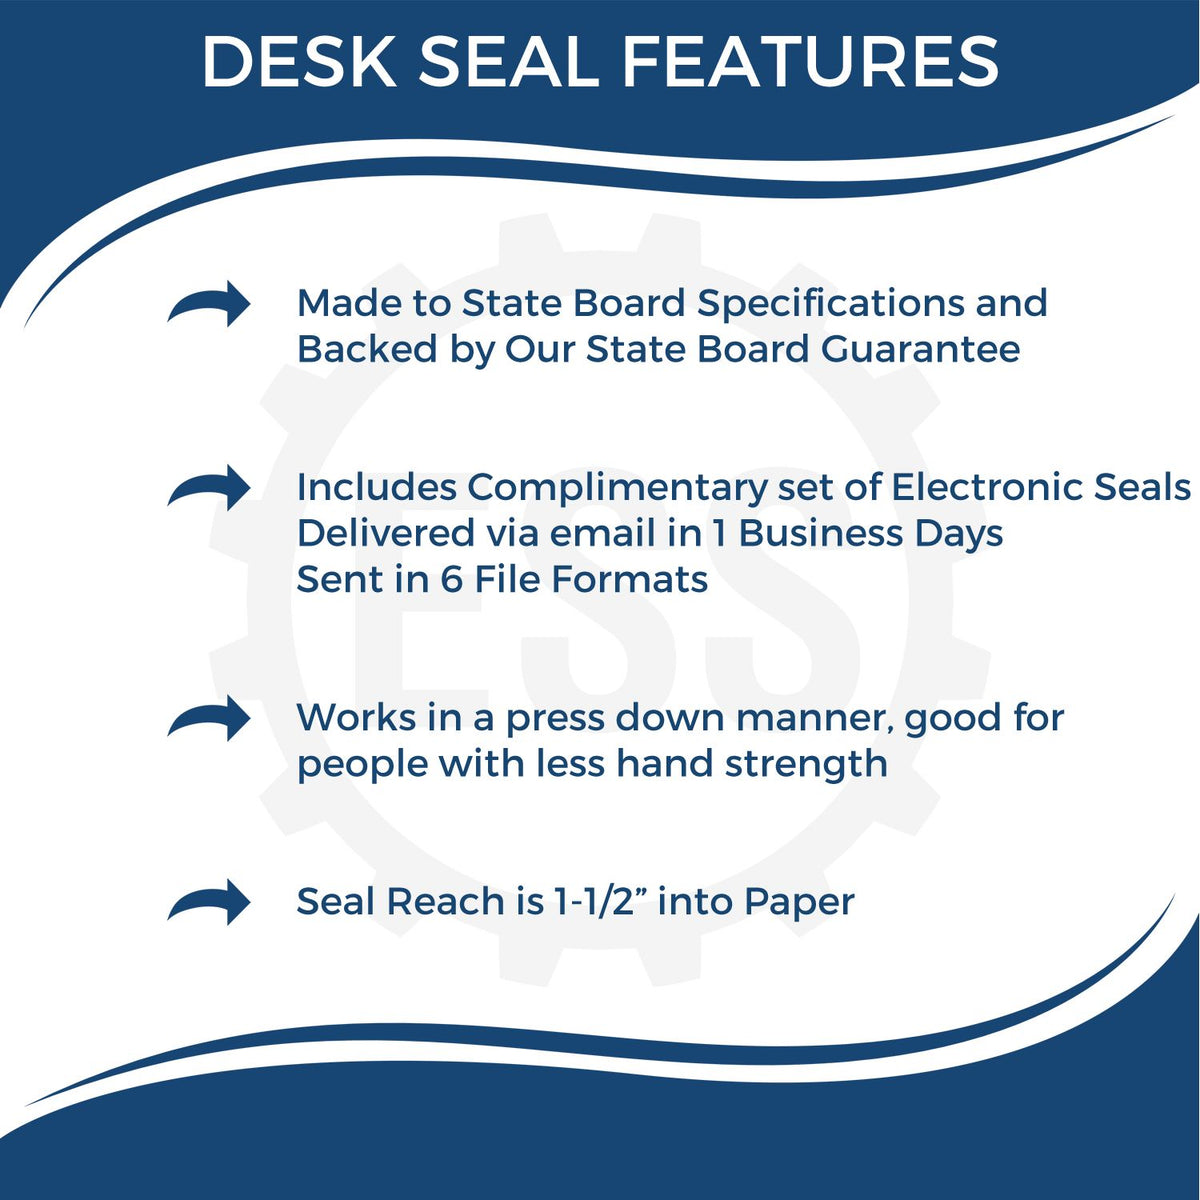 A picture of an infographic highlighting the selling points for the Hawaii Desk Surveyor Seal Embosser